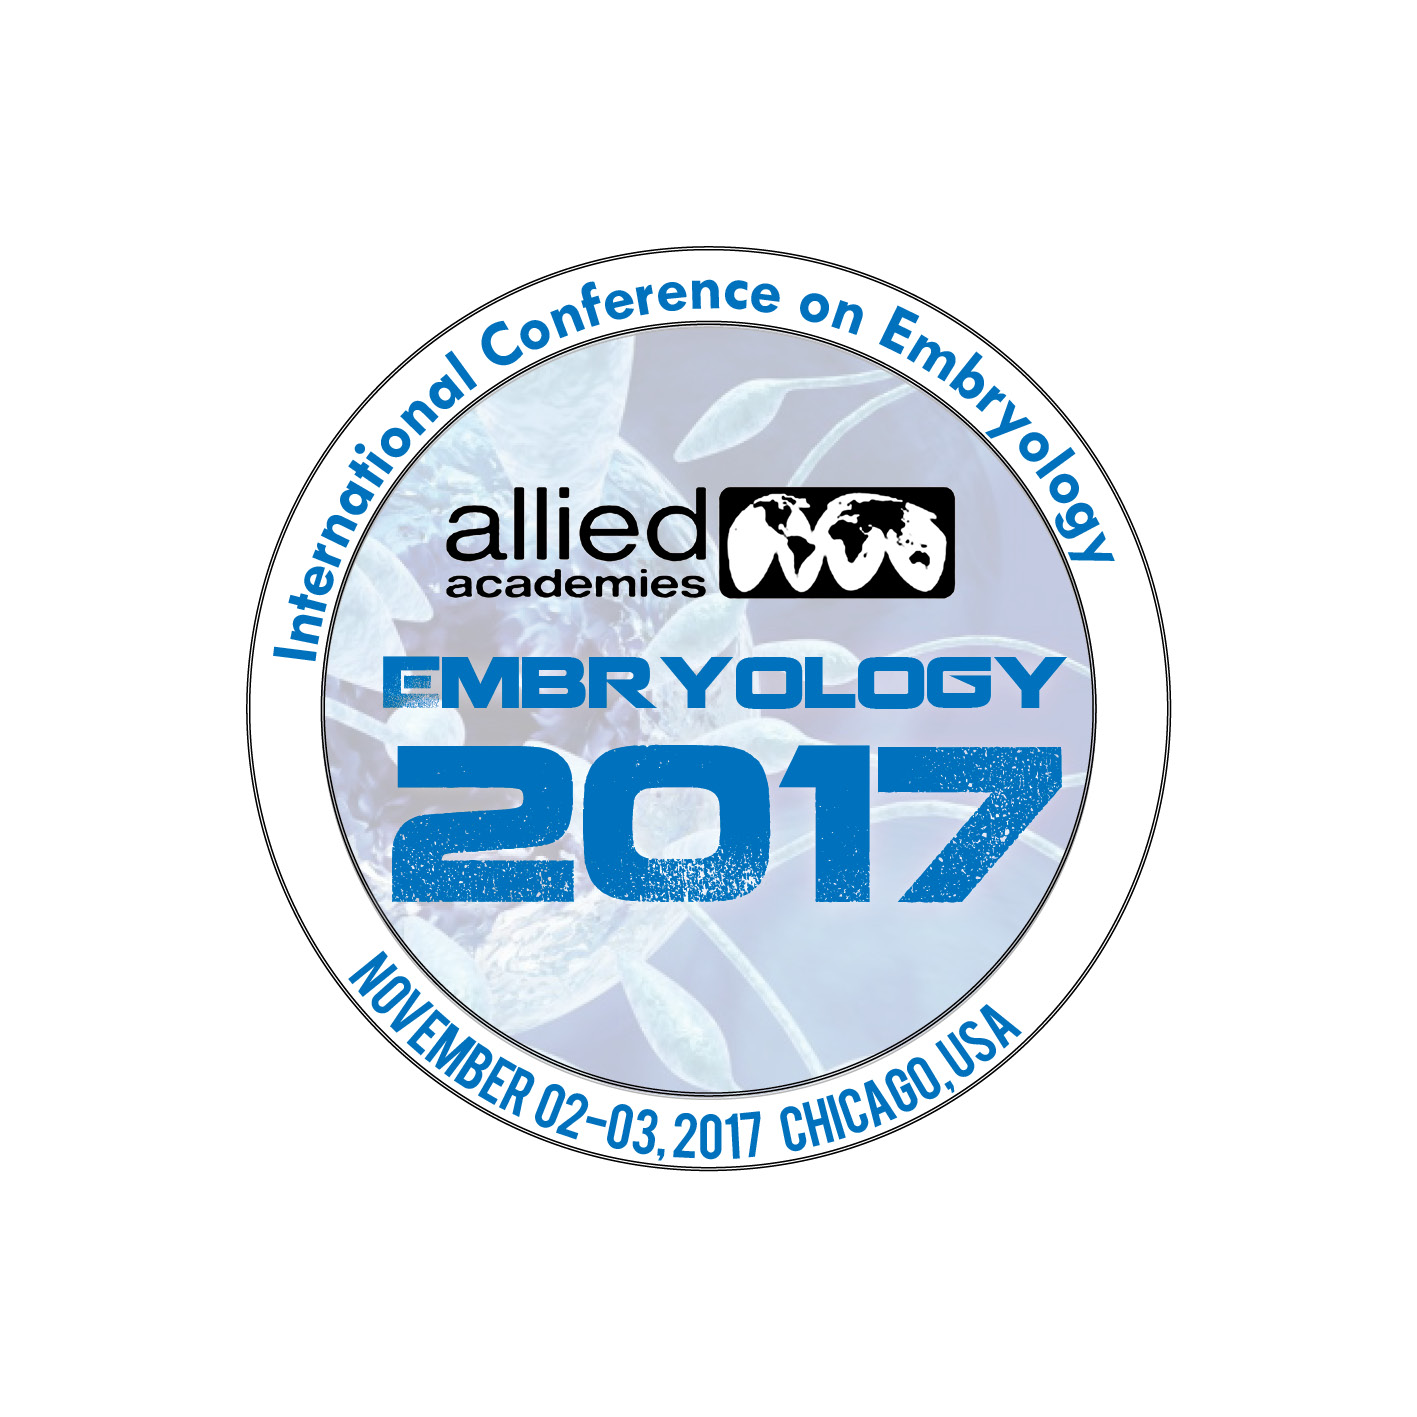 International Conference on Embryology 
Embryology 2017
November 02-03, 2017.
Theme: Conceptual History and Techniques in Modern Developmental Biology
